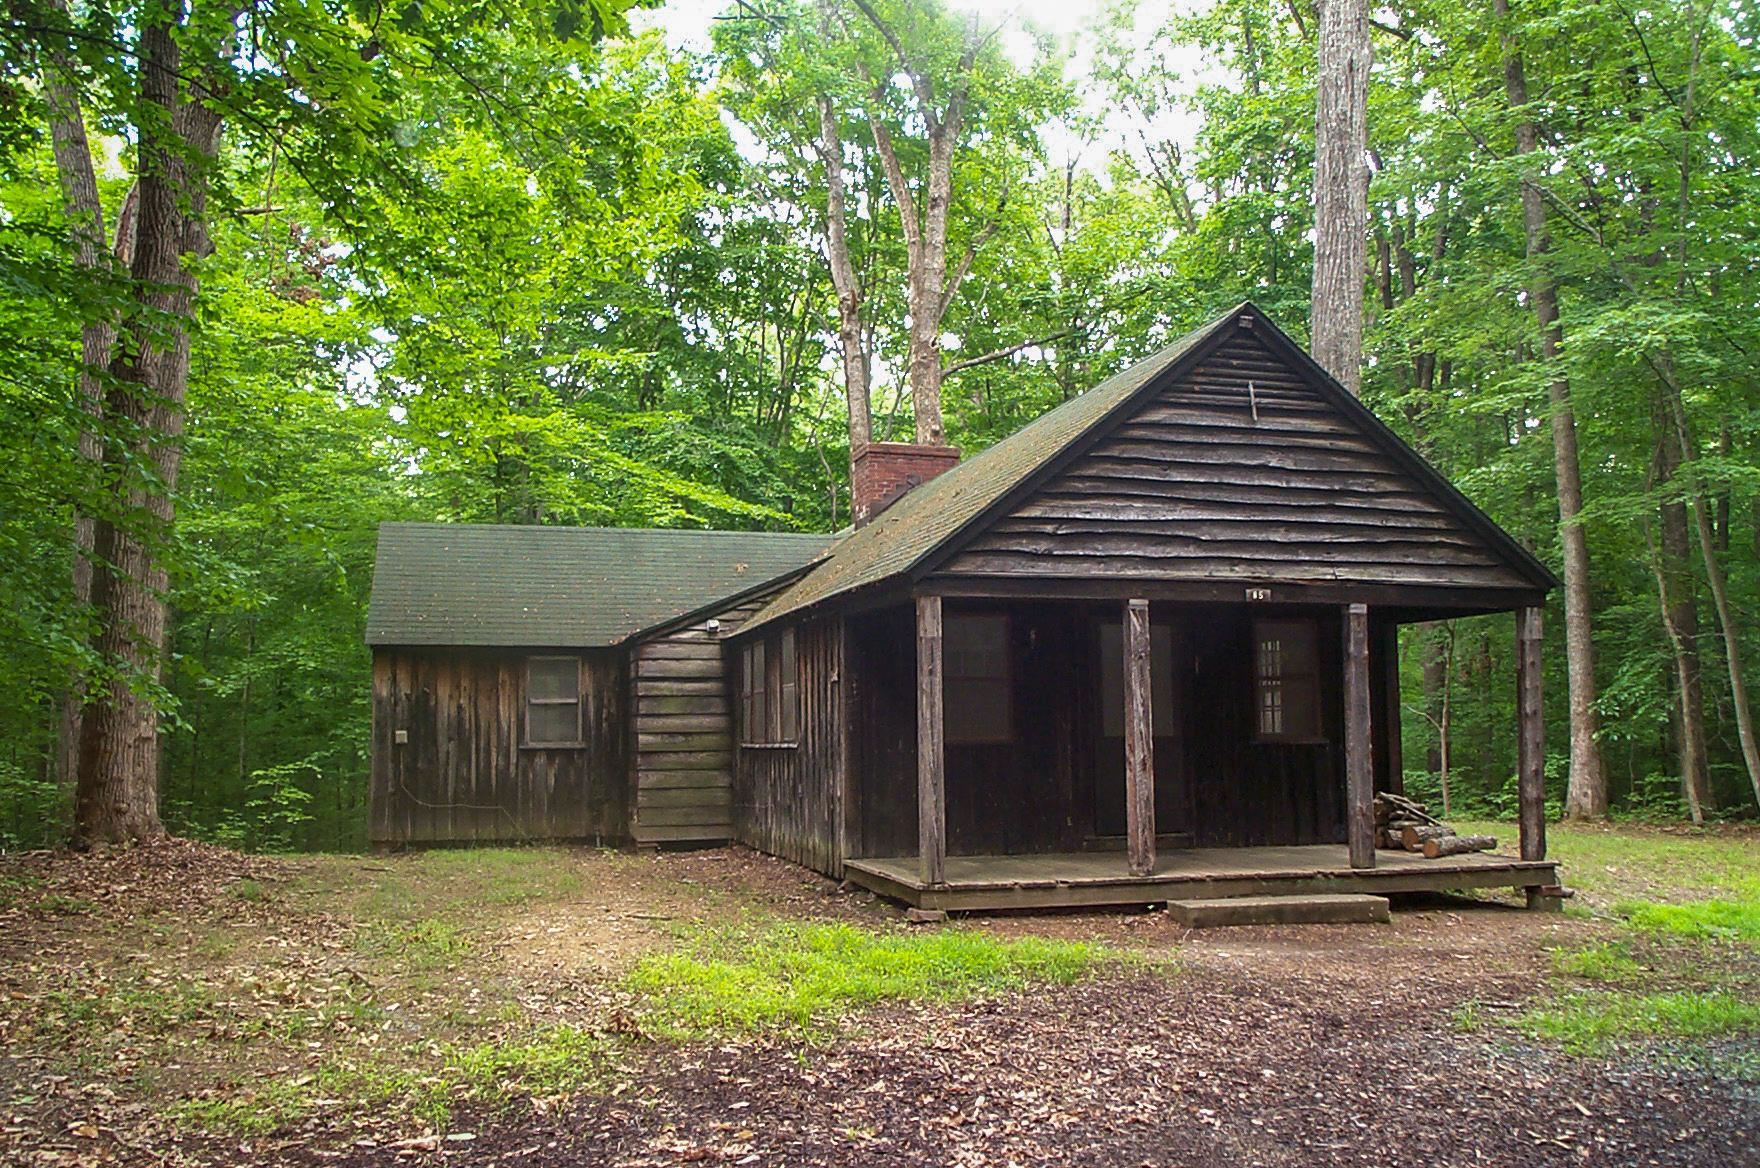 A brown wooden building with a brick fireplace sits among trees